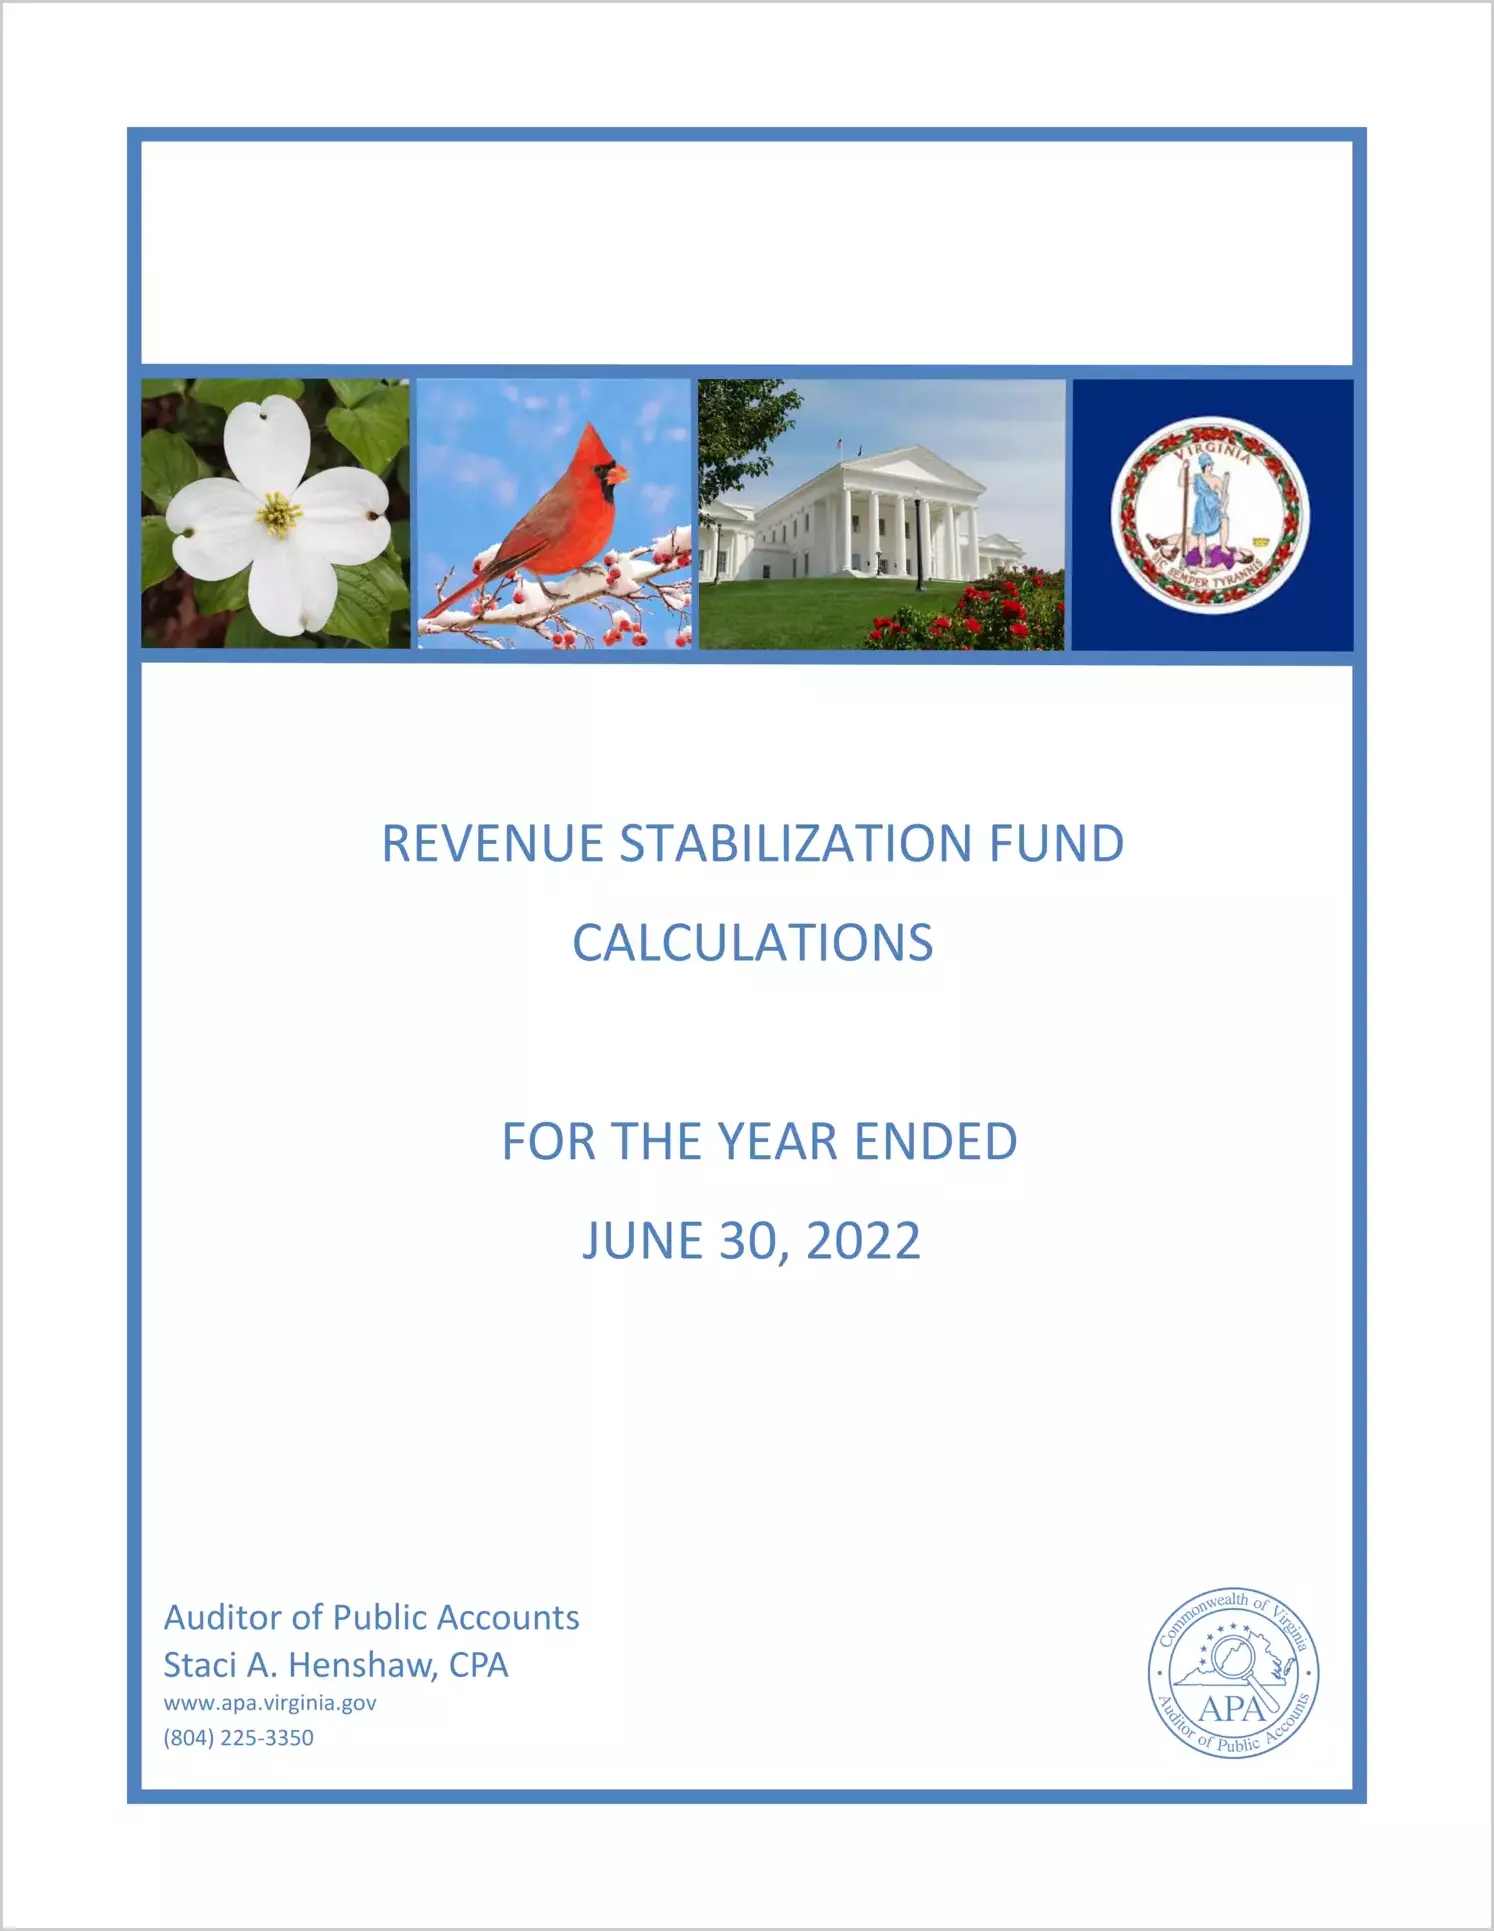 Revenue Stabilization Fund Calculations for the year ended June 30, 2022